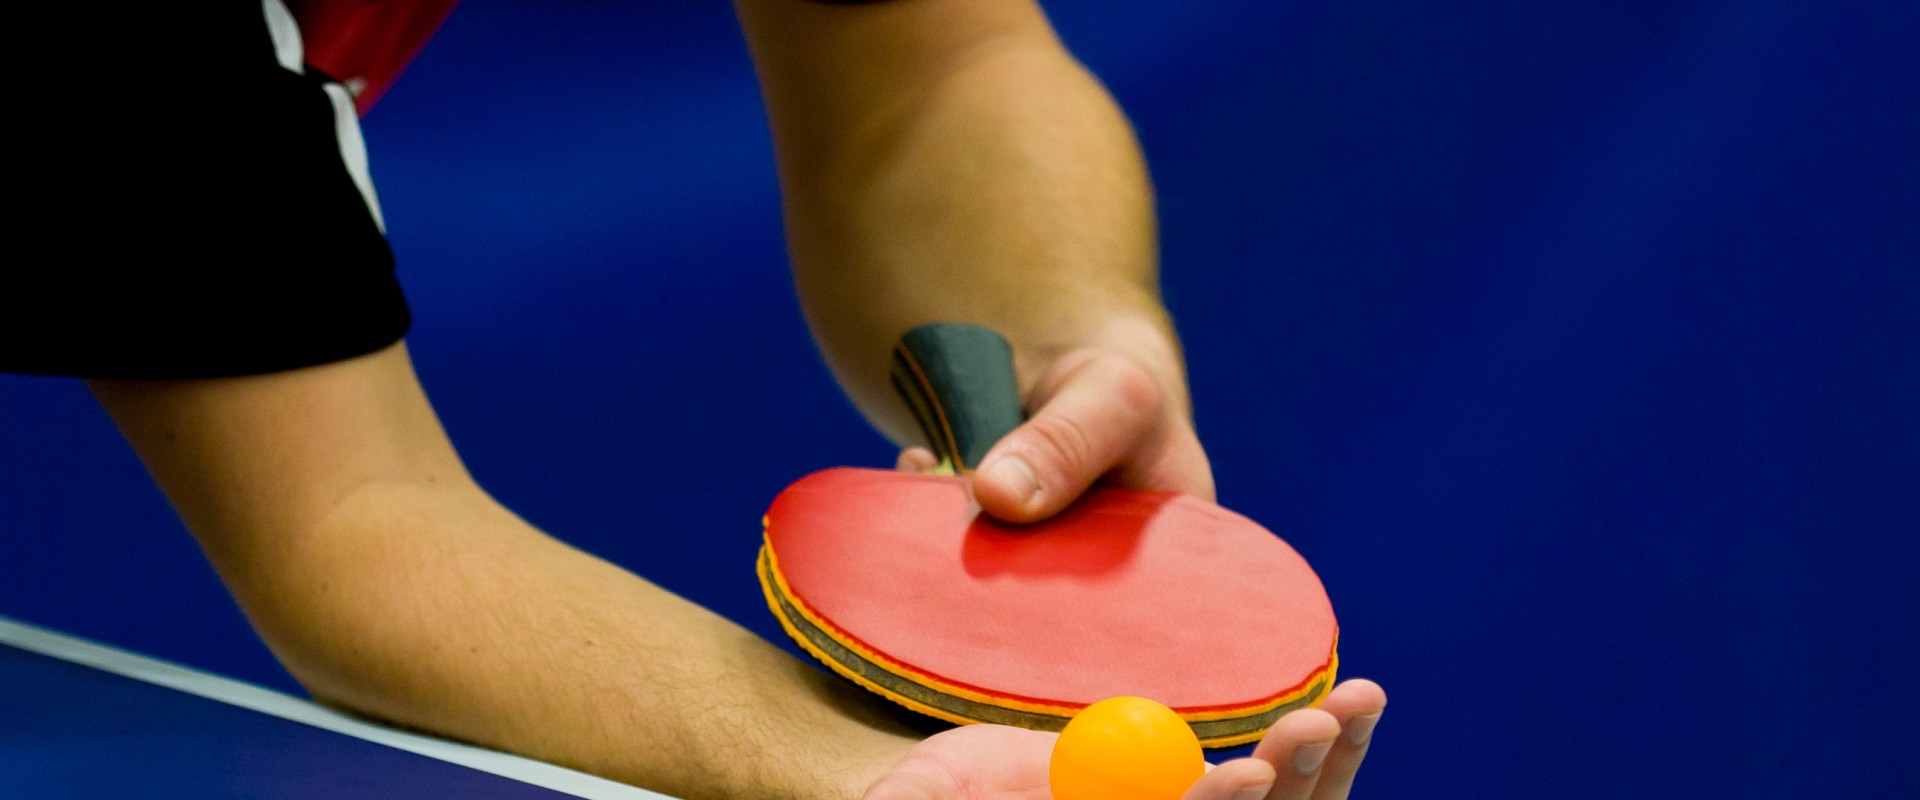 How to Improve Your Table Tennis Skills